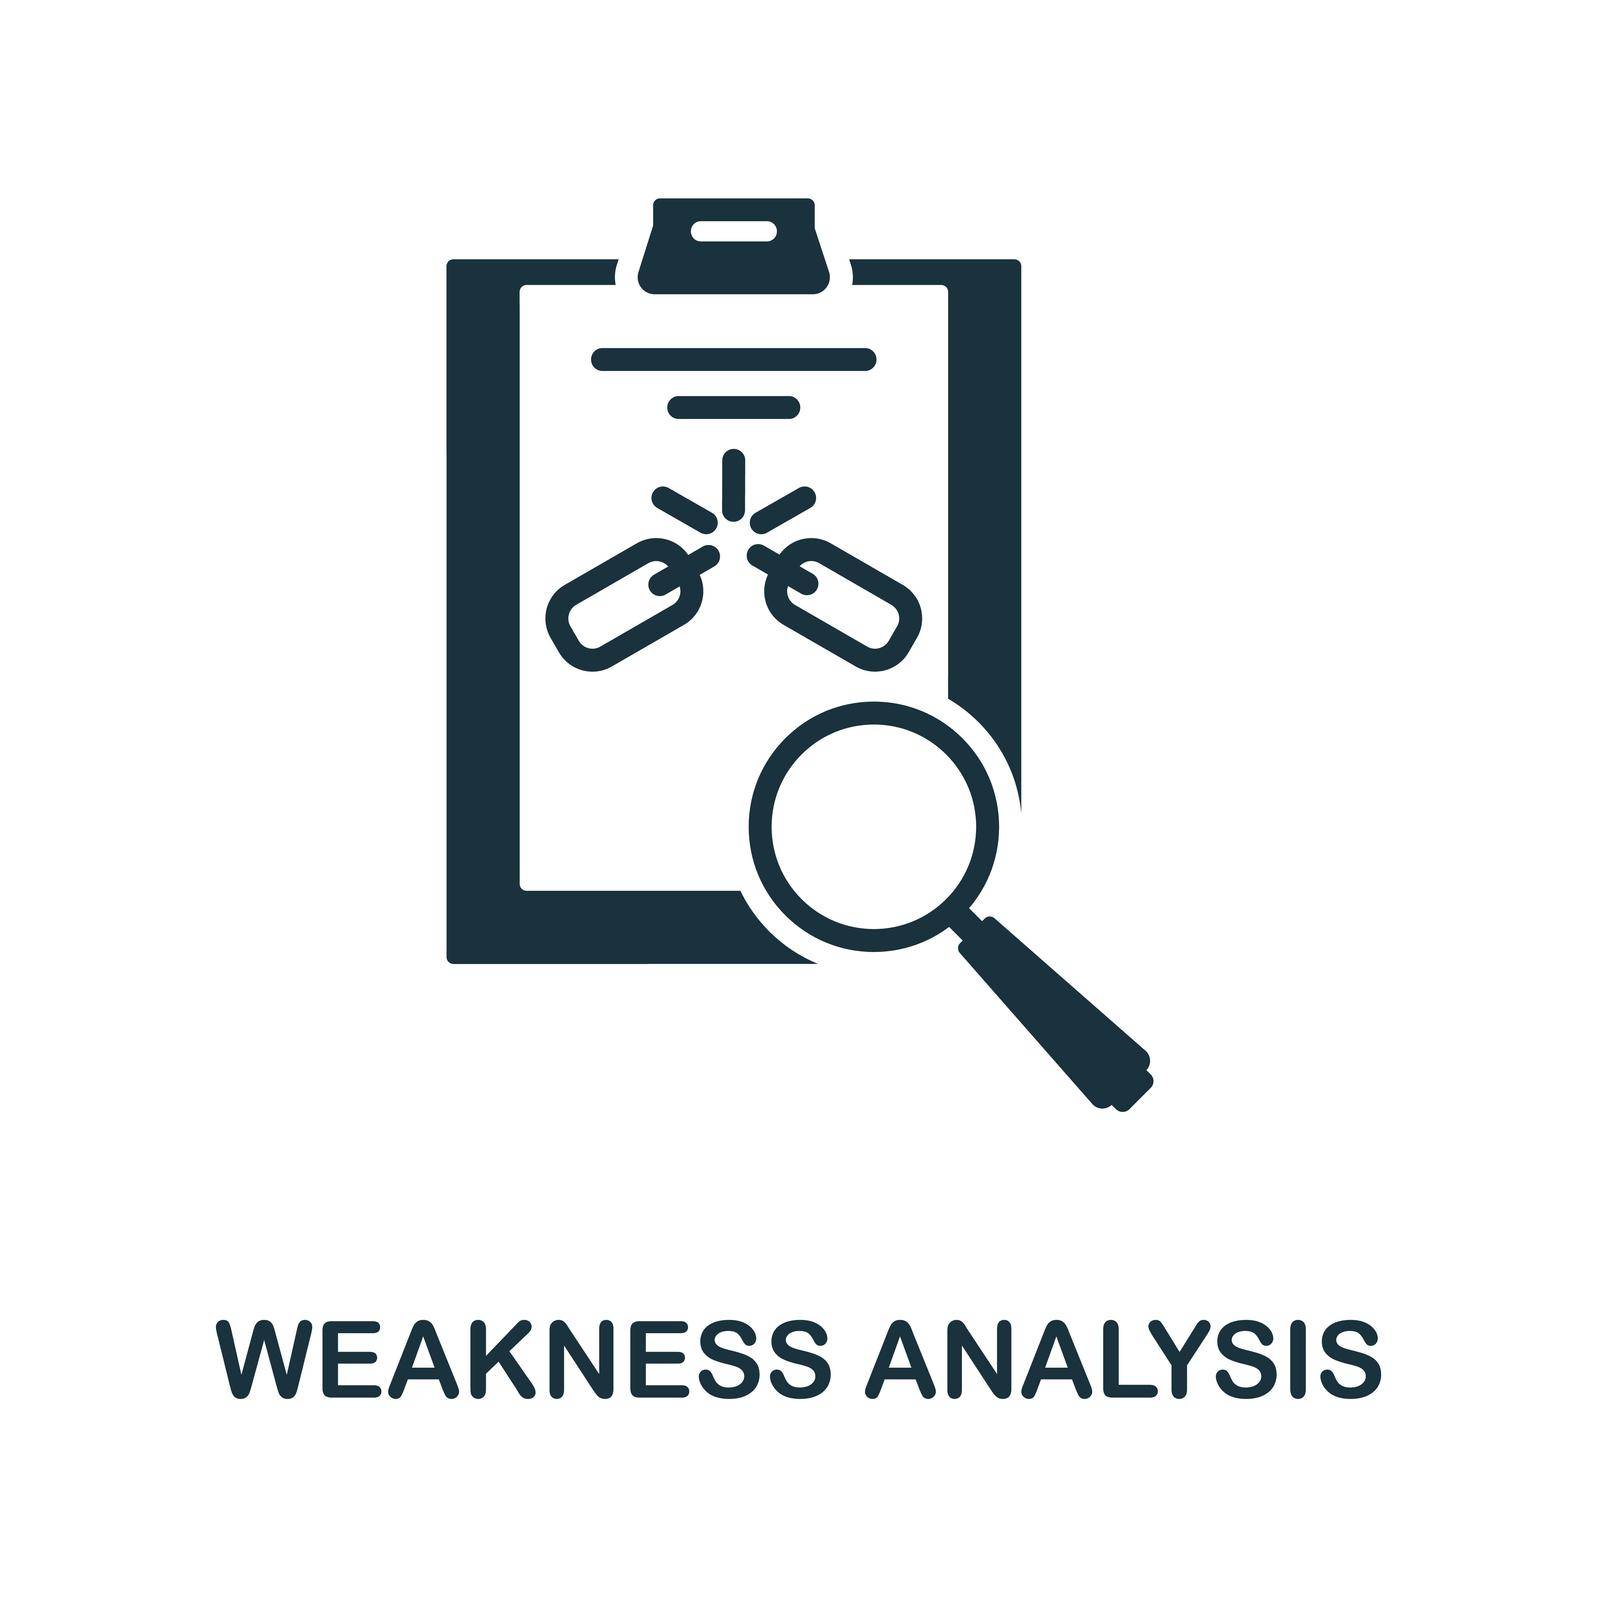 Weakness Analysis icon. Black sign from corporate development collection. Creative Weakness Analysis icon for web design, templates and infographics.